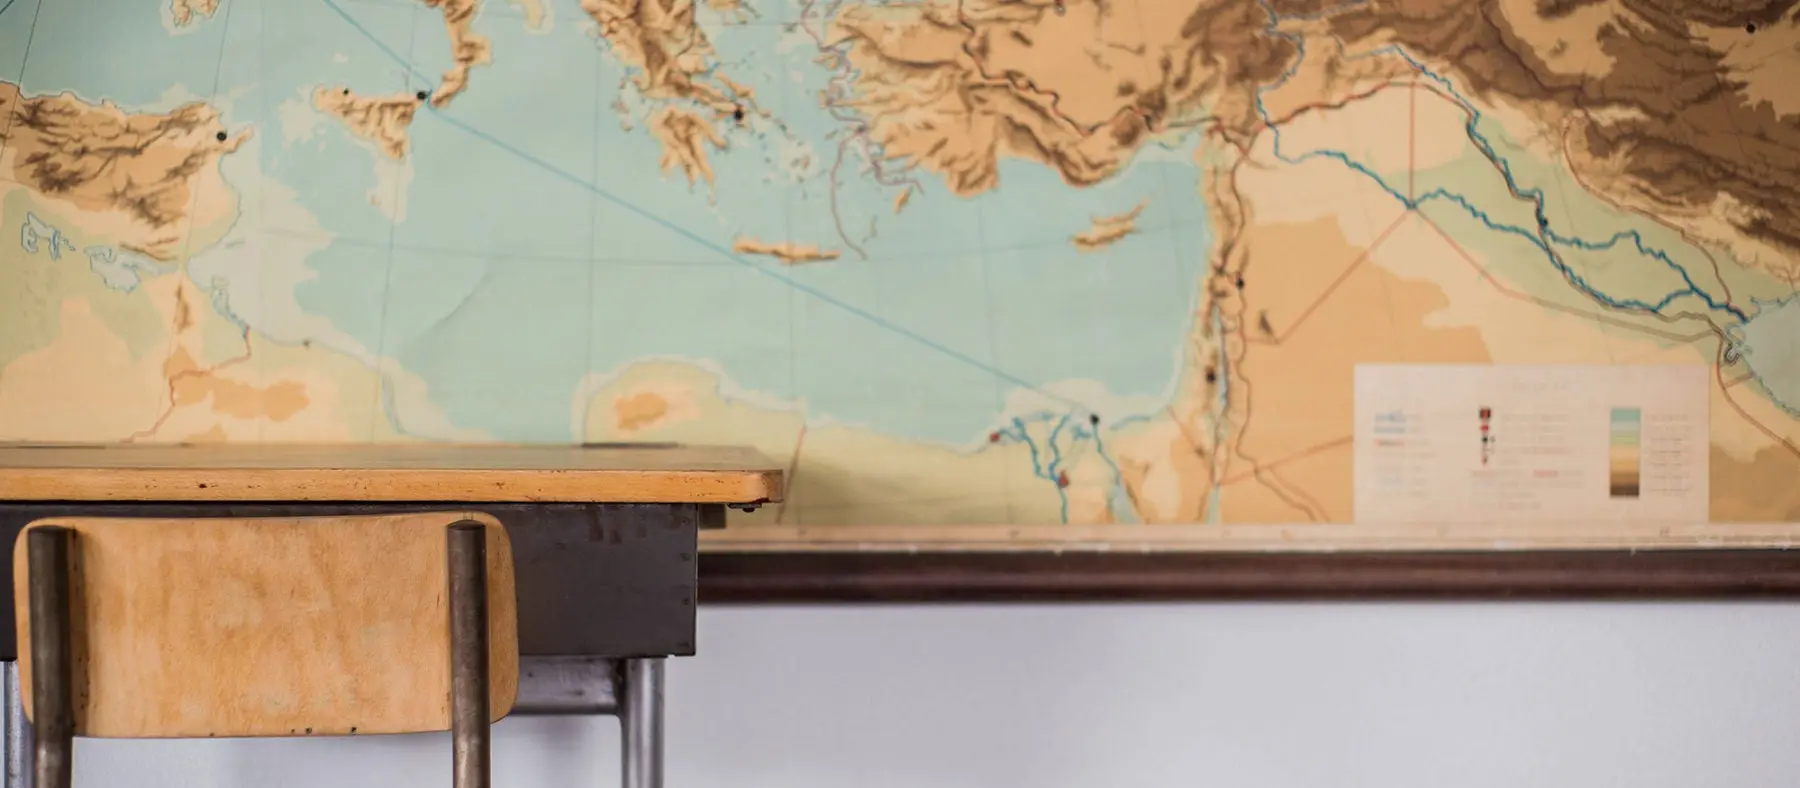 Empty desks at school classroom with world map